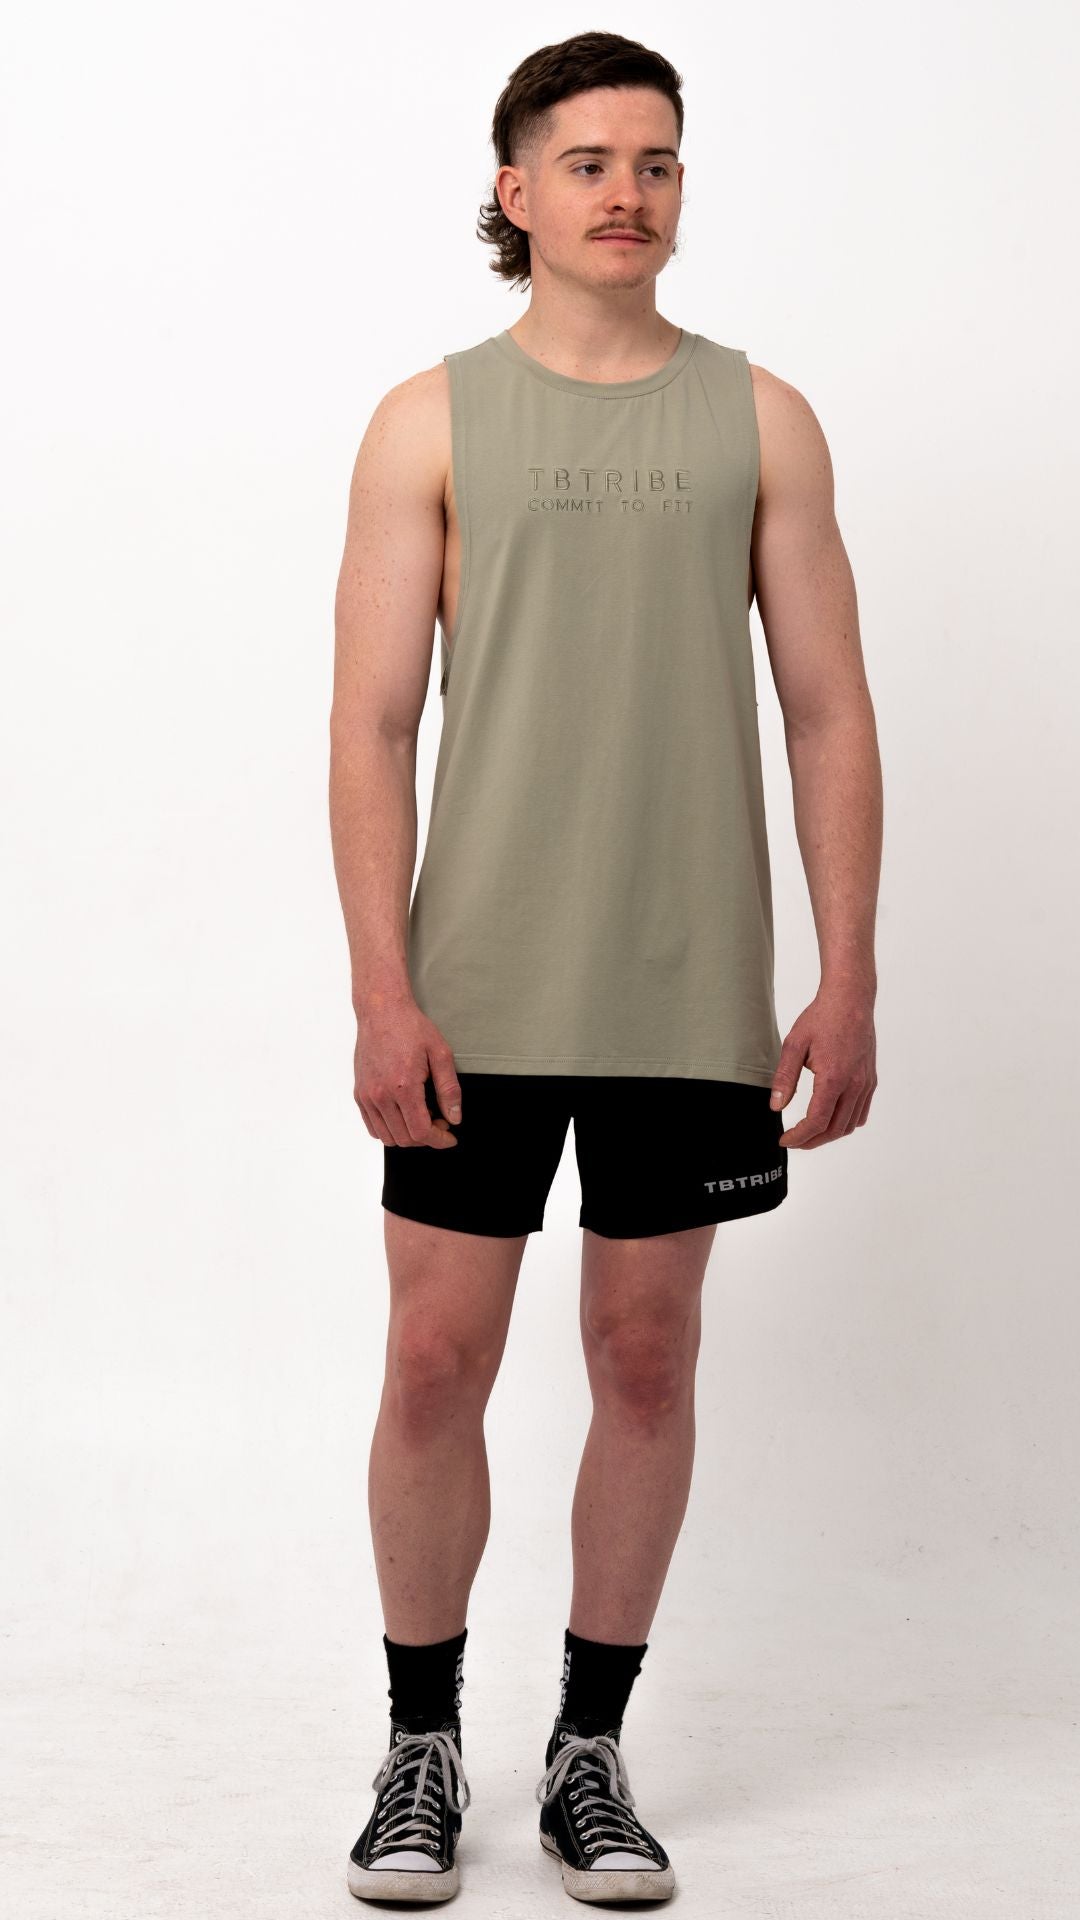 olive green colour, muscle up tank, with embroidered black logo in the middle of the chest. For gym ,training, weights, crossfit